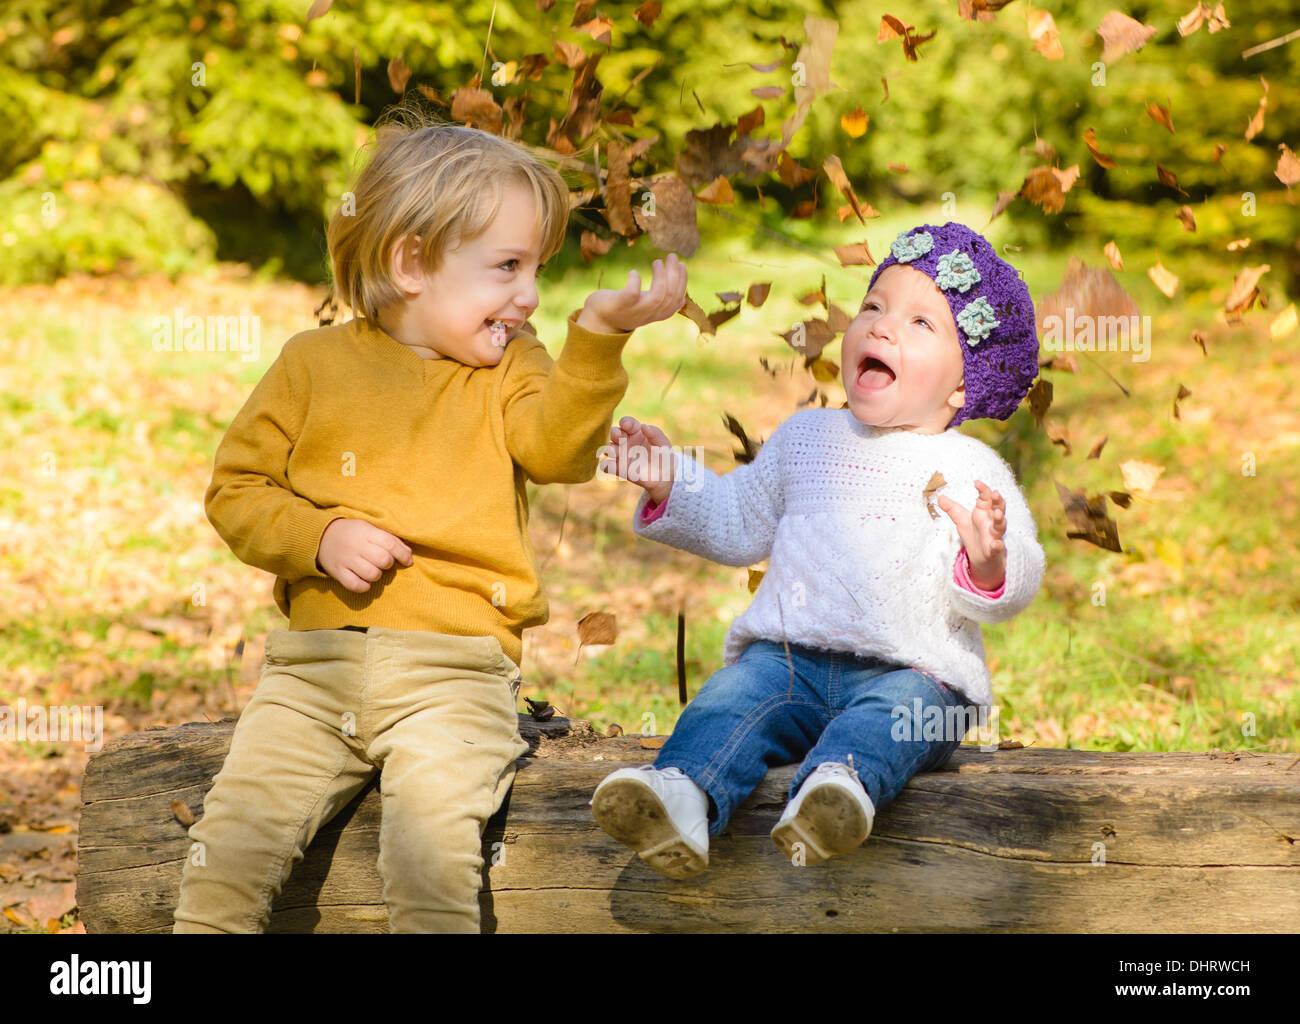 Children throwing leaves in autumn forest Stock Photo